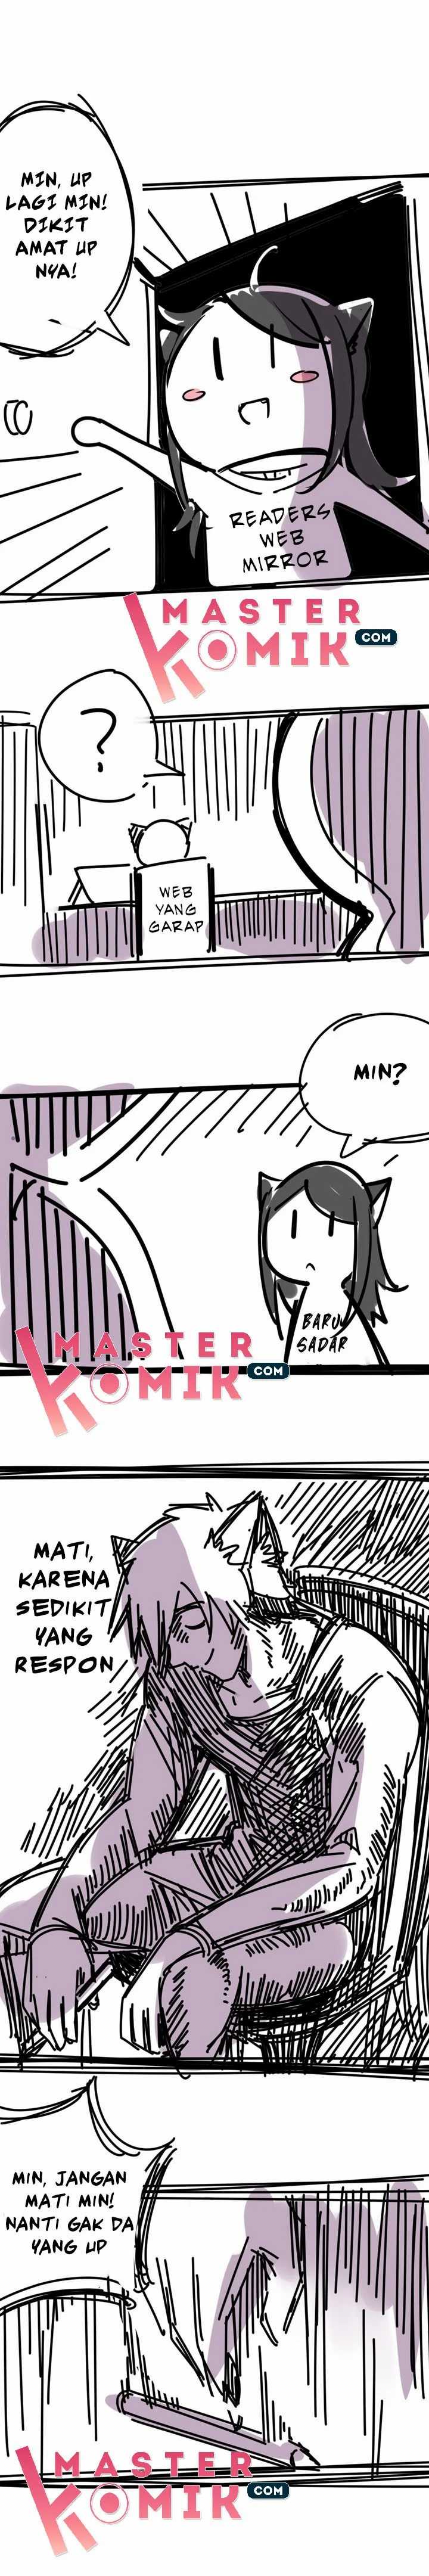 Demon X Angel, Can’t Get Along! Chapter 06